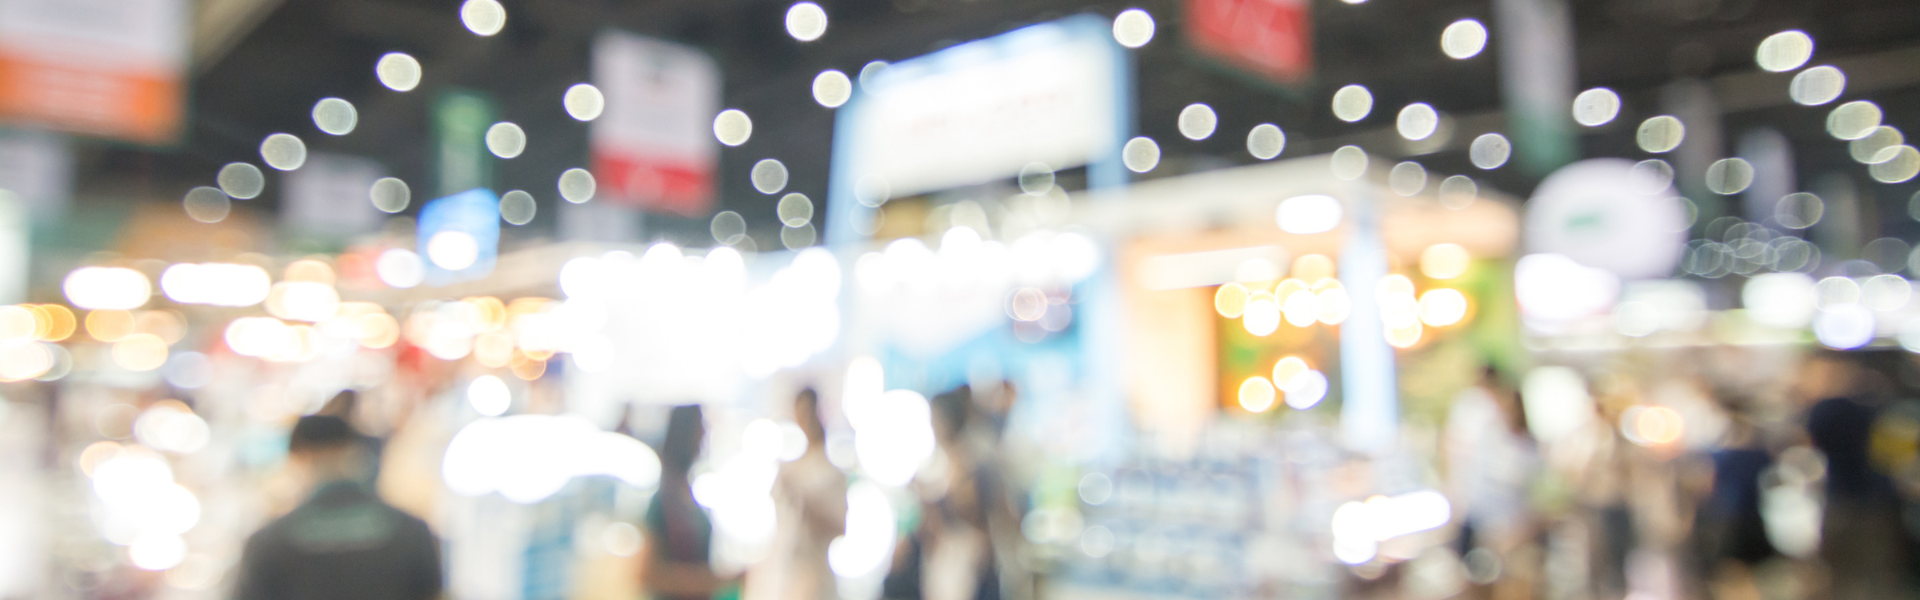 increase trade show vendor attendance with event wifi